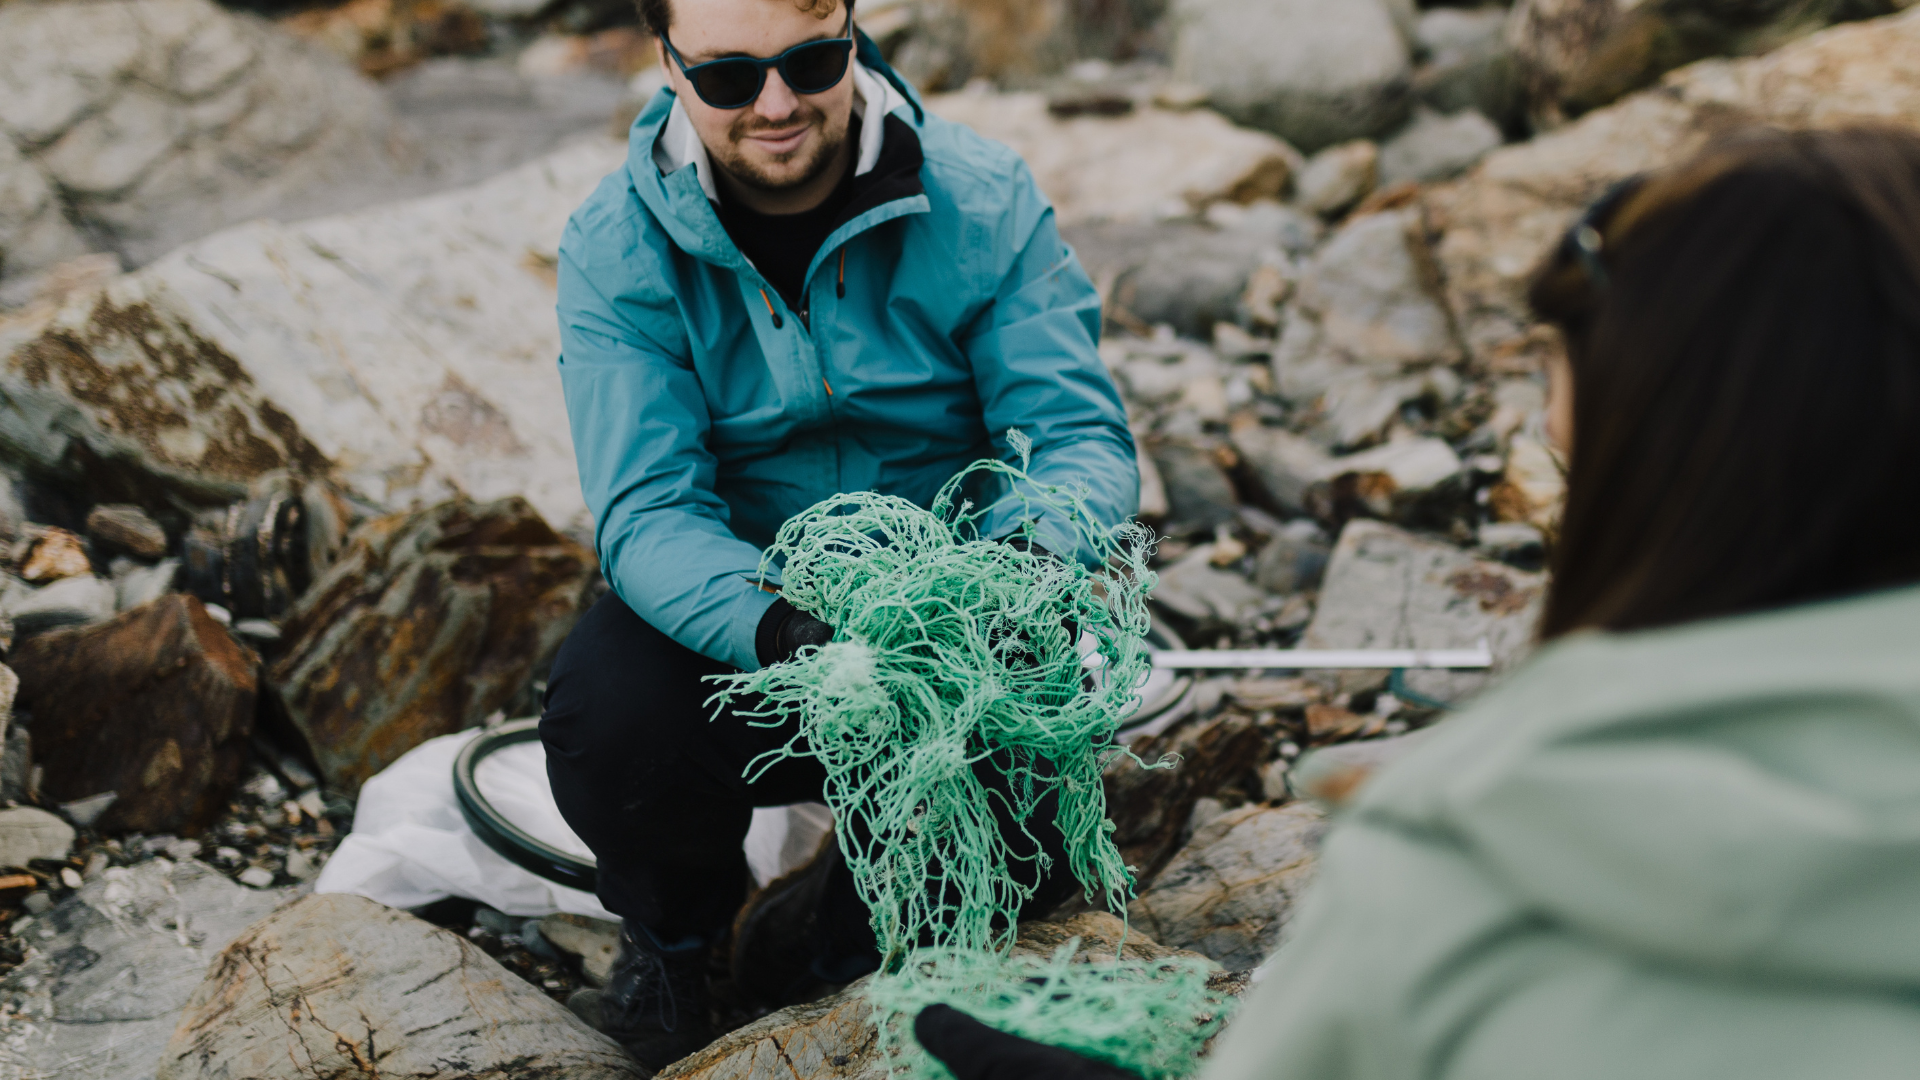 A person holding a ghost fishing net on a rocky landscape.